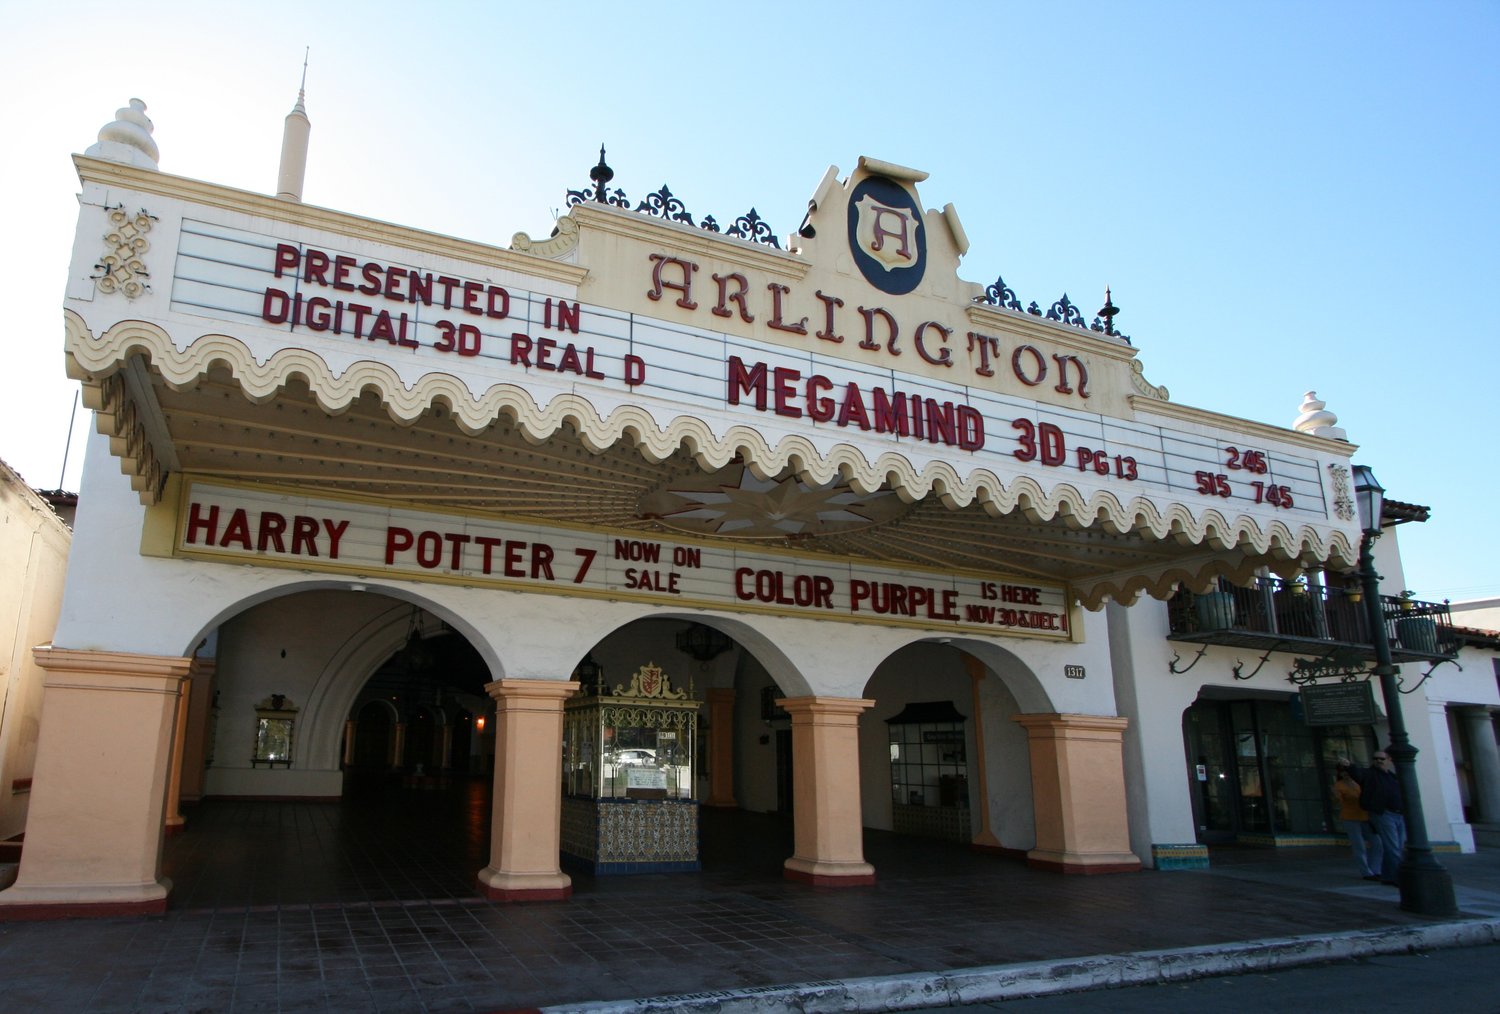 The Arlington Theater is one of many buildings designed and built in a Spanish style, after a 1925 earthquake destroyed 85 percent of the buildings in Santa Barbara, California.